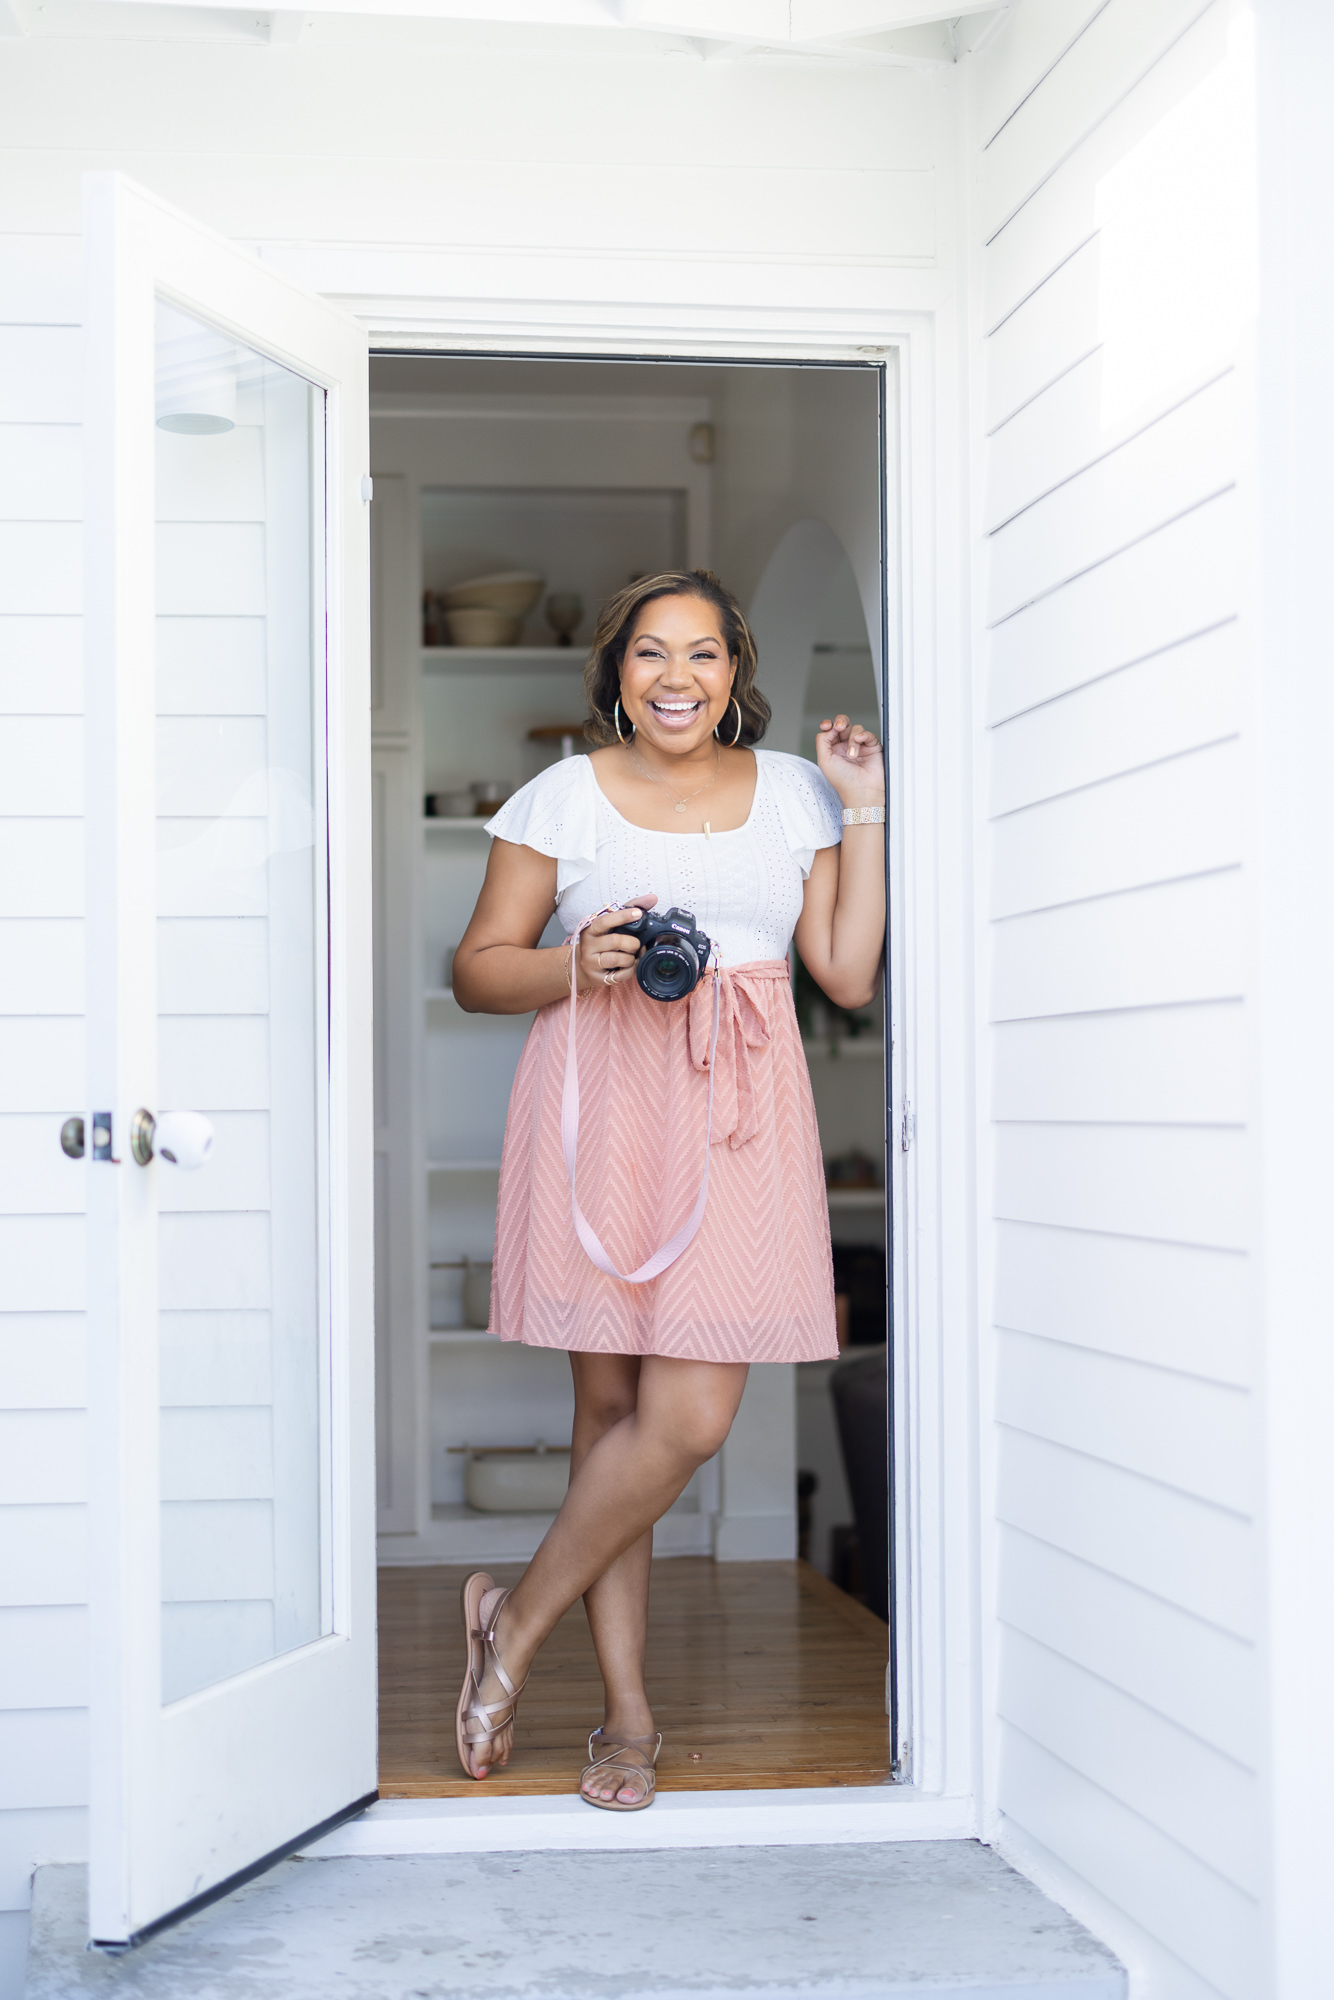 personal branding photoshoot woman standing in doorway holding a camera